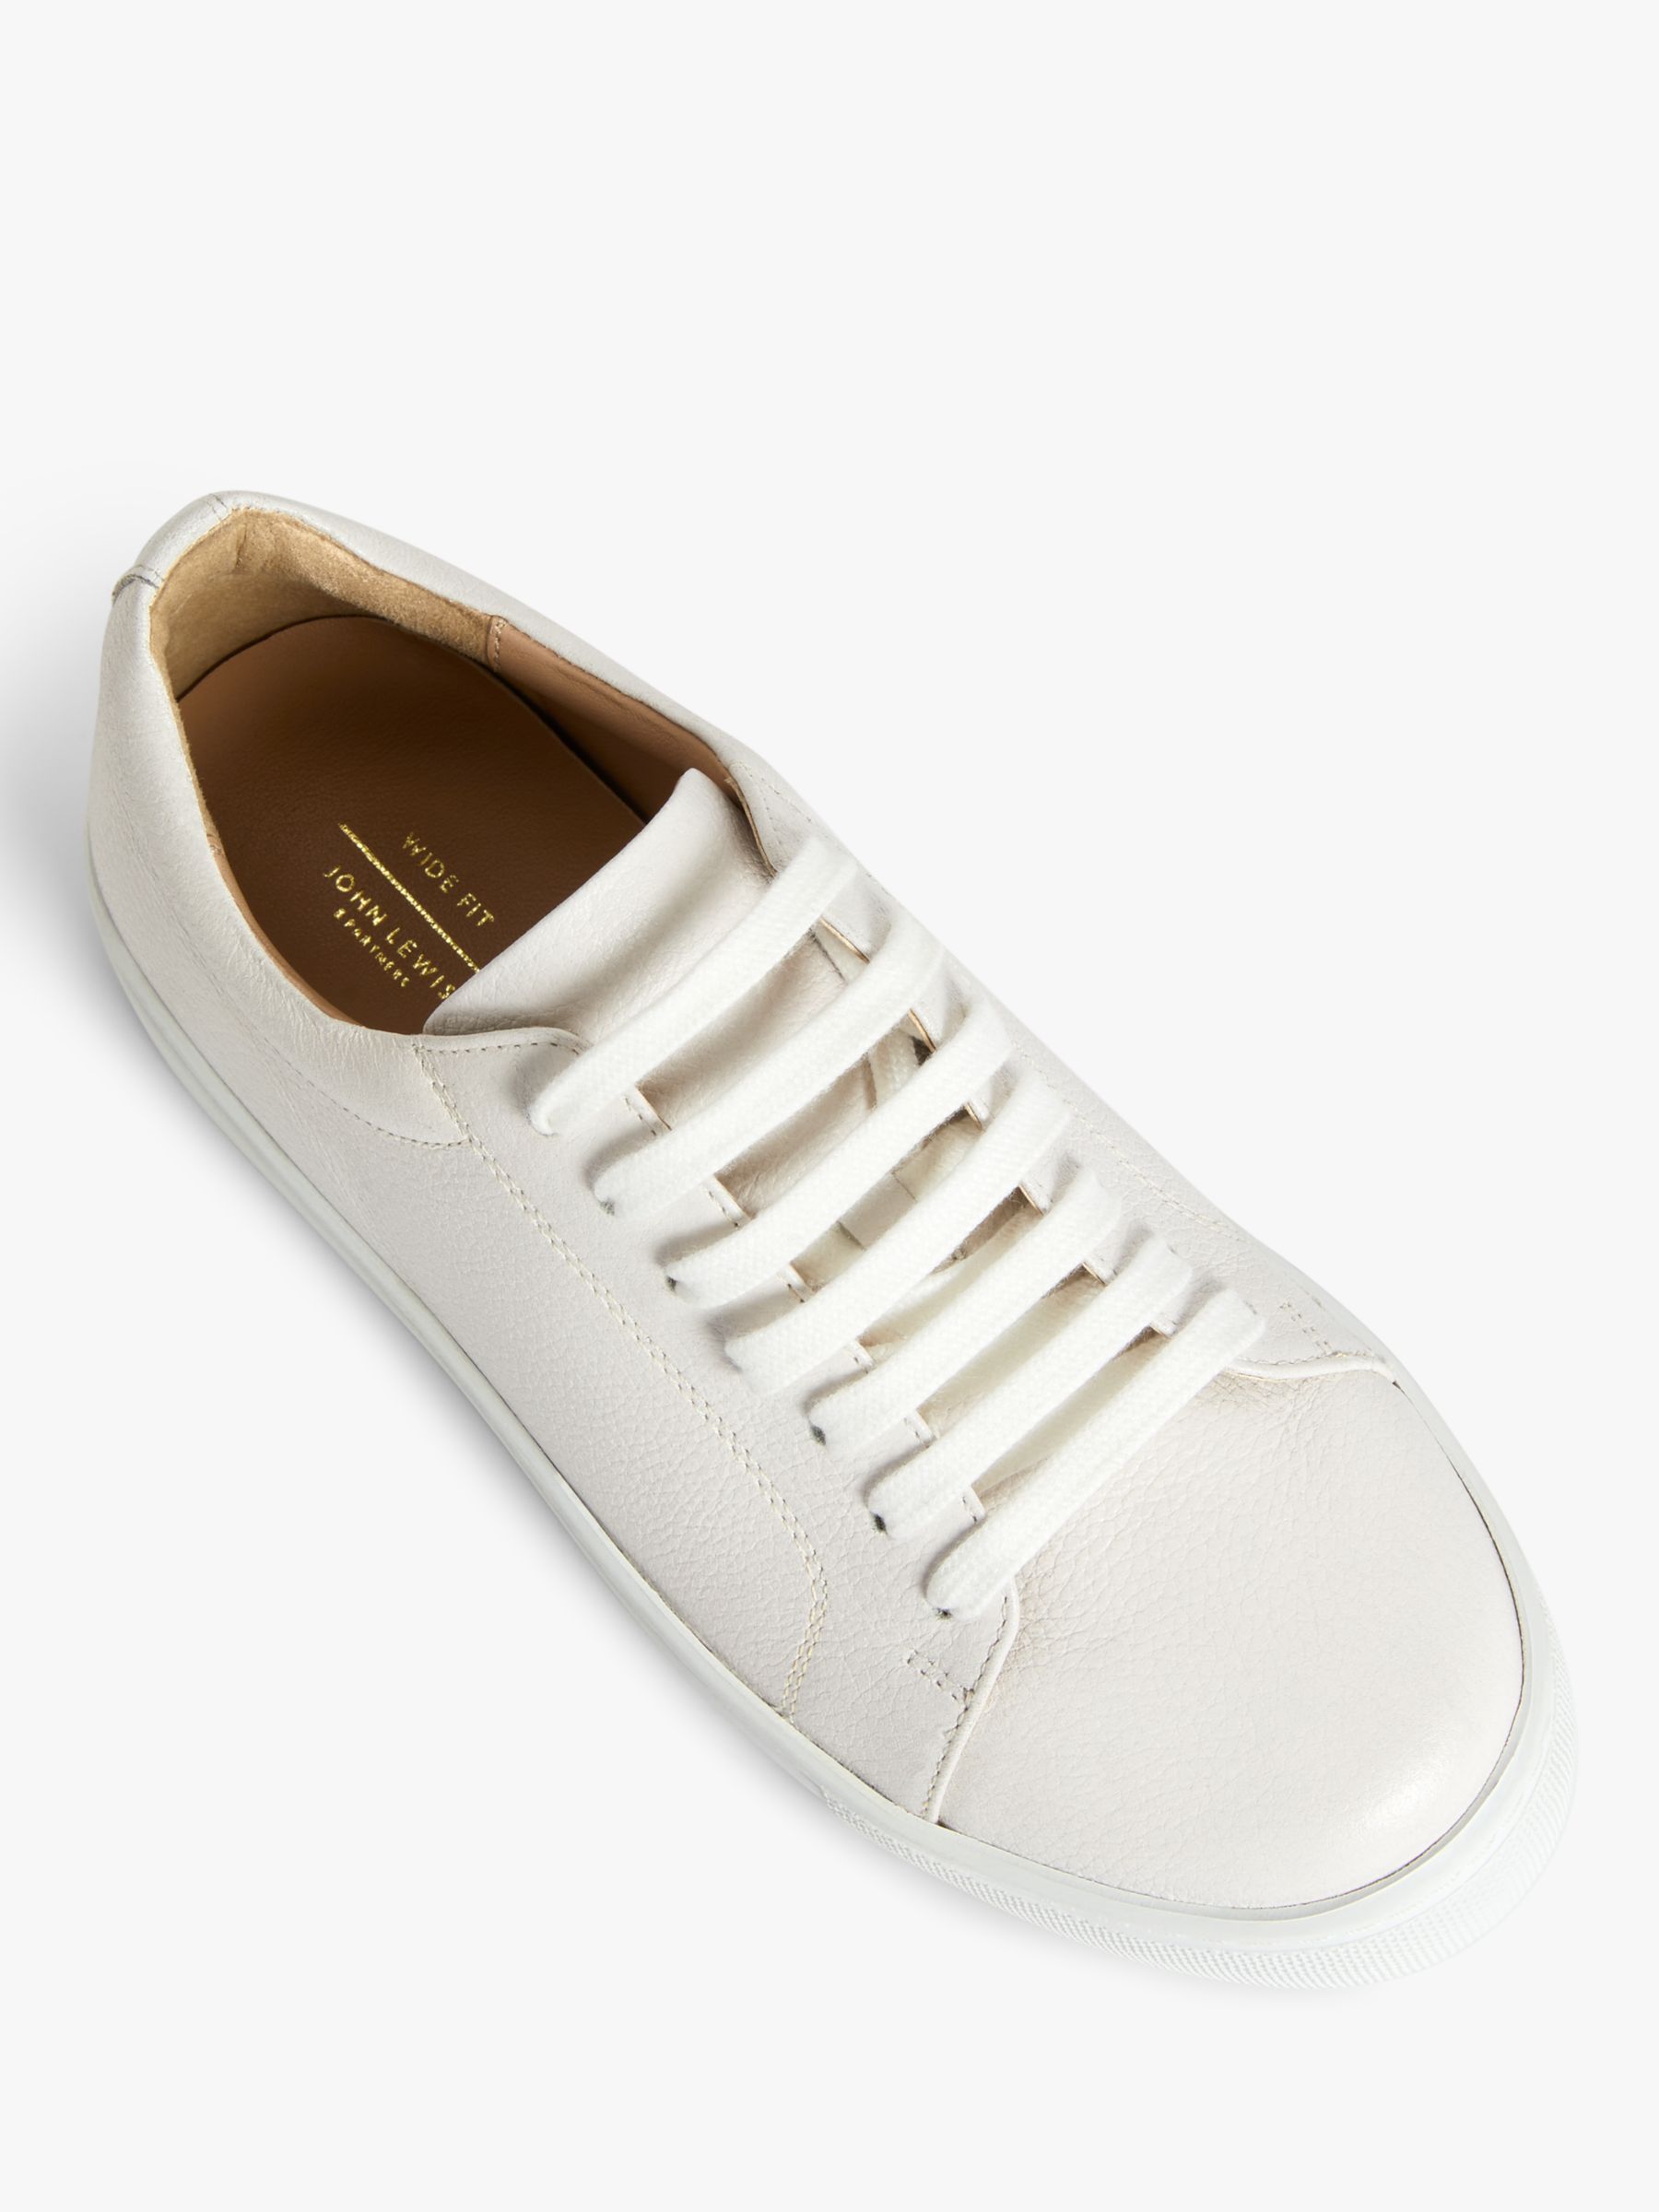 Buy John Lewis Florette Wide Fit Leather Trainers Online at johnlewis.com